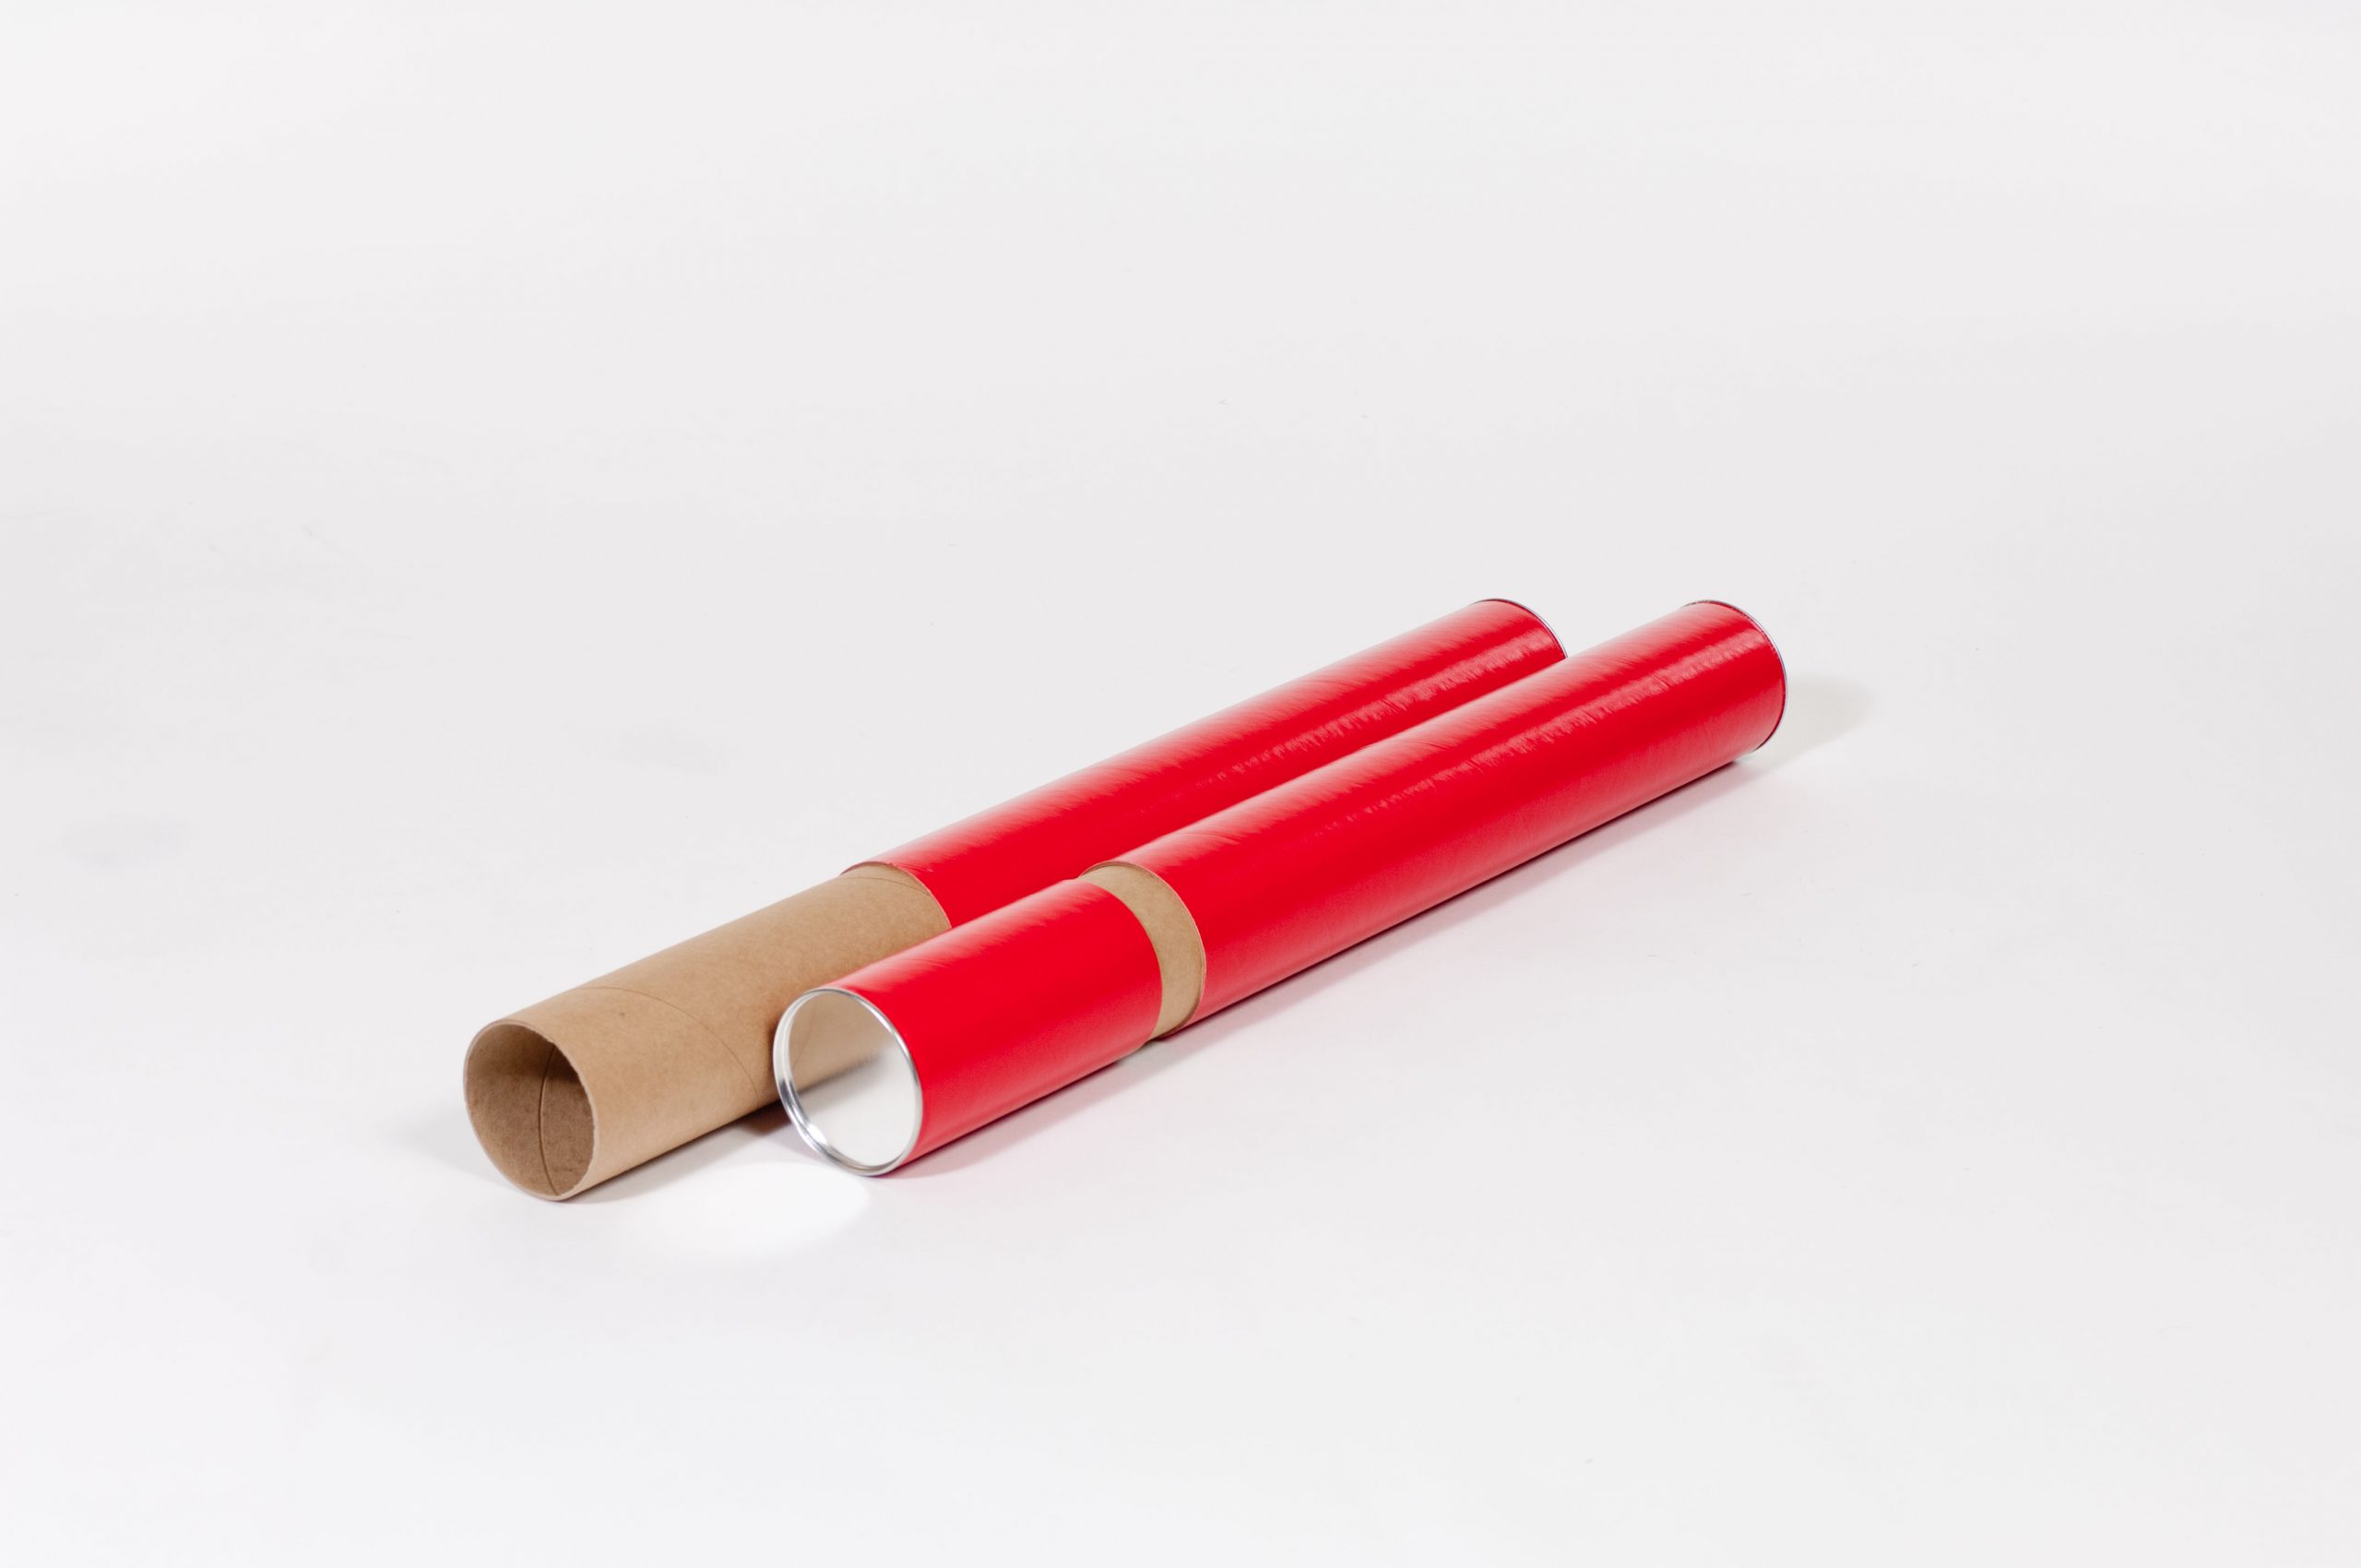 3x24" Red Telescoping Tube (24/Case) $75.83/piece - Packingstuff.com 3 Piece Red Telescoping Tube 24